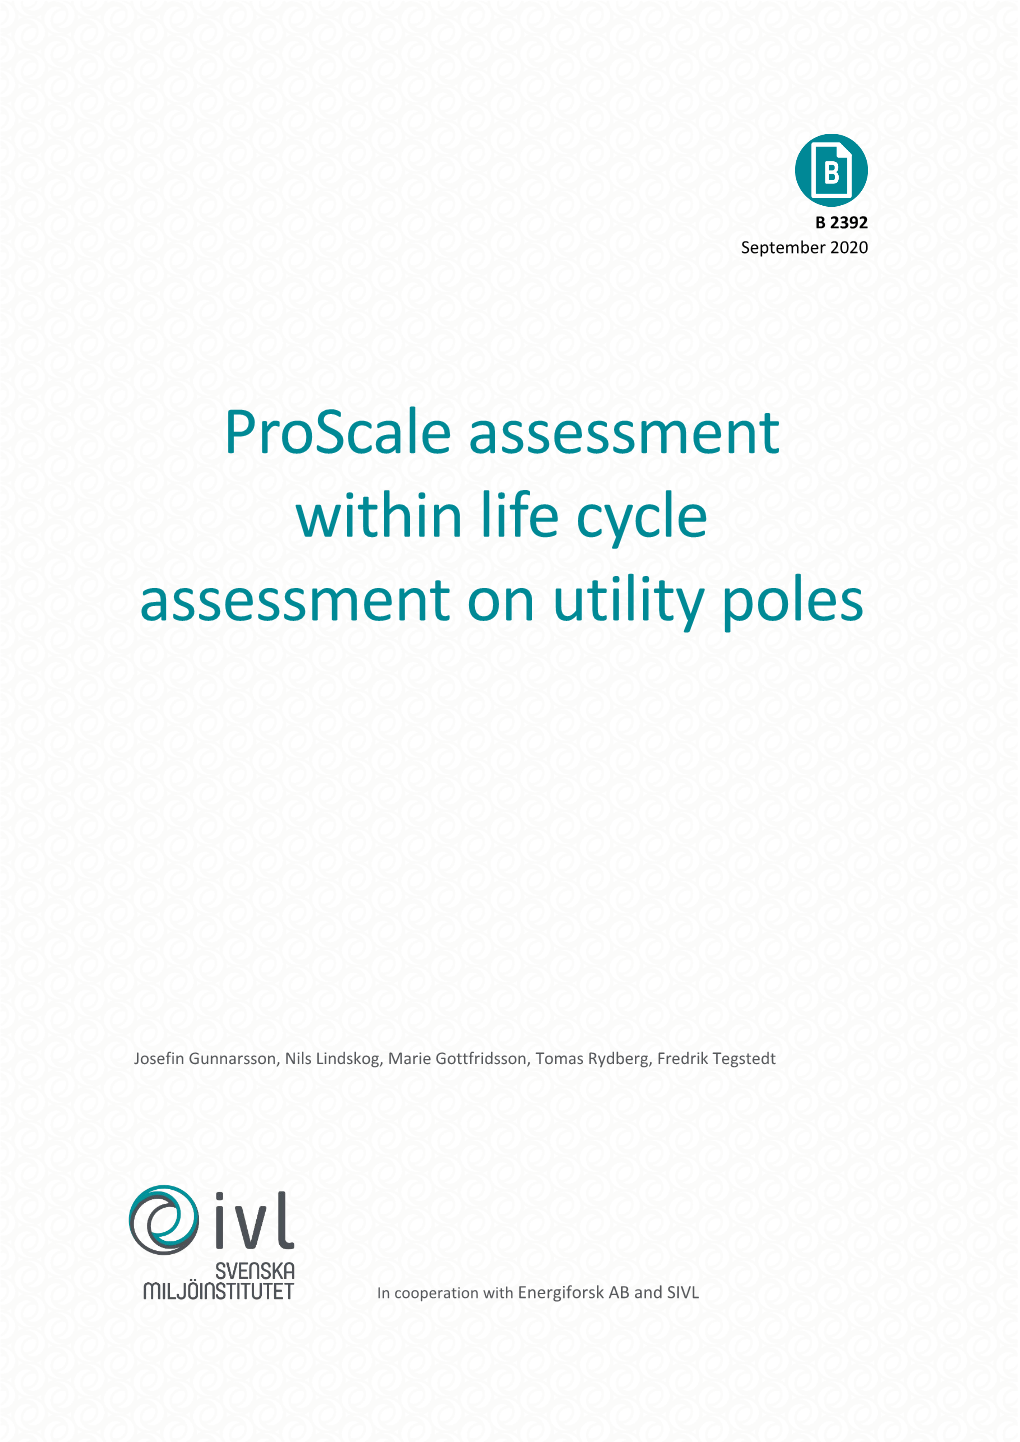 Proscale Assessment Within LCA on Utility Poles